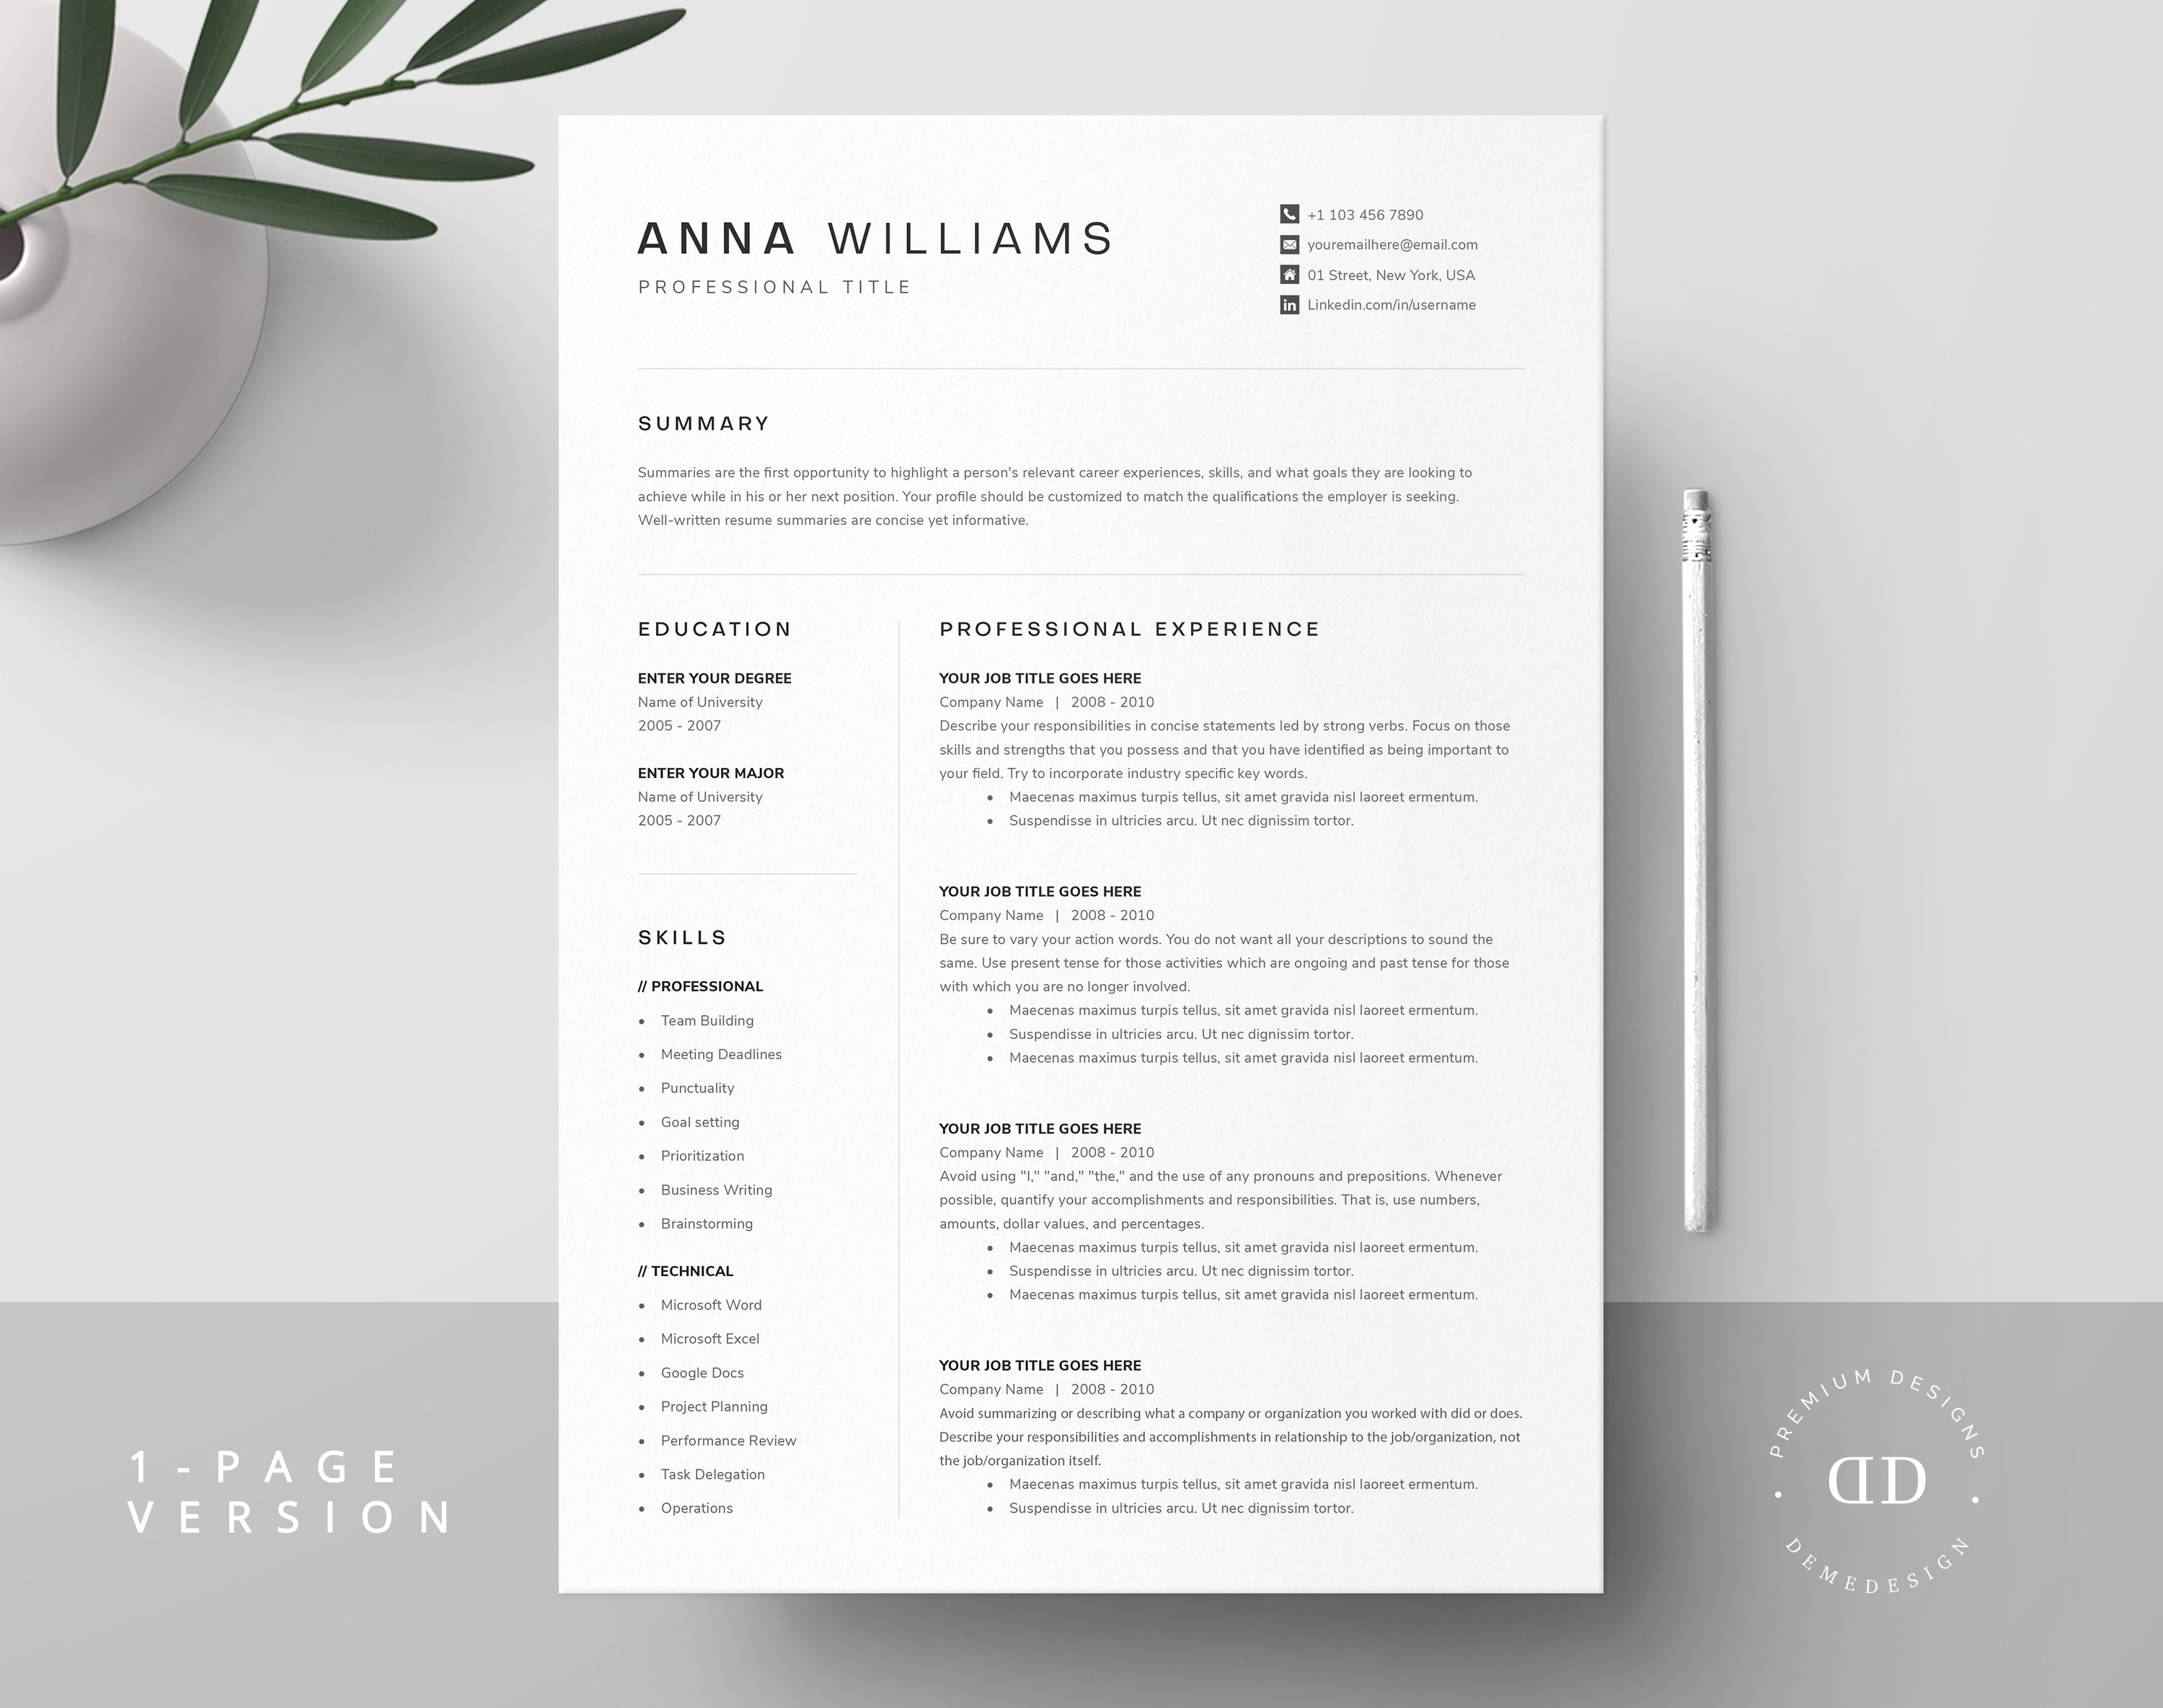 Resume Template Pack | Word, Pages cover image.